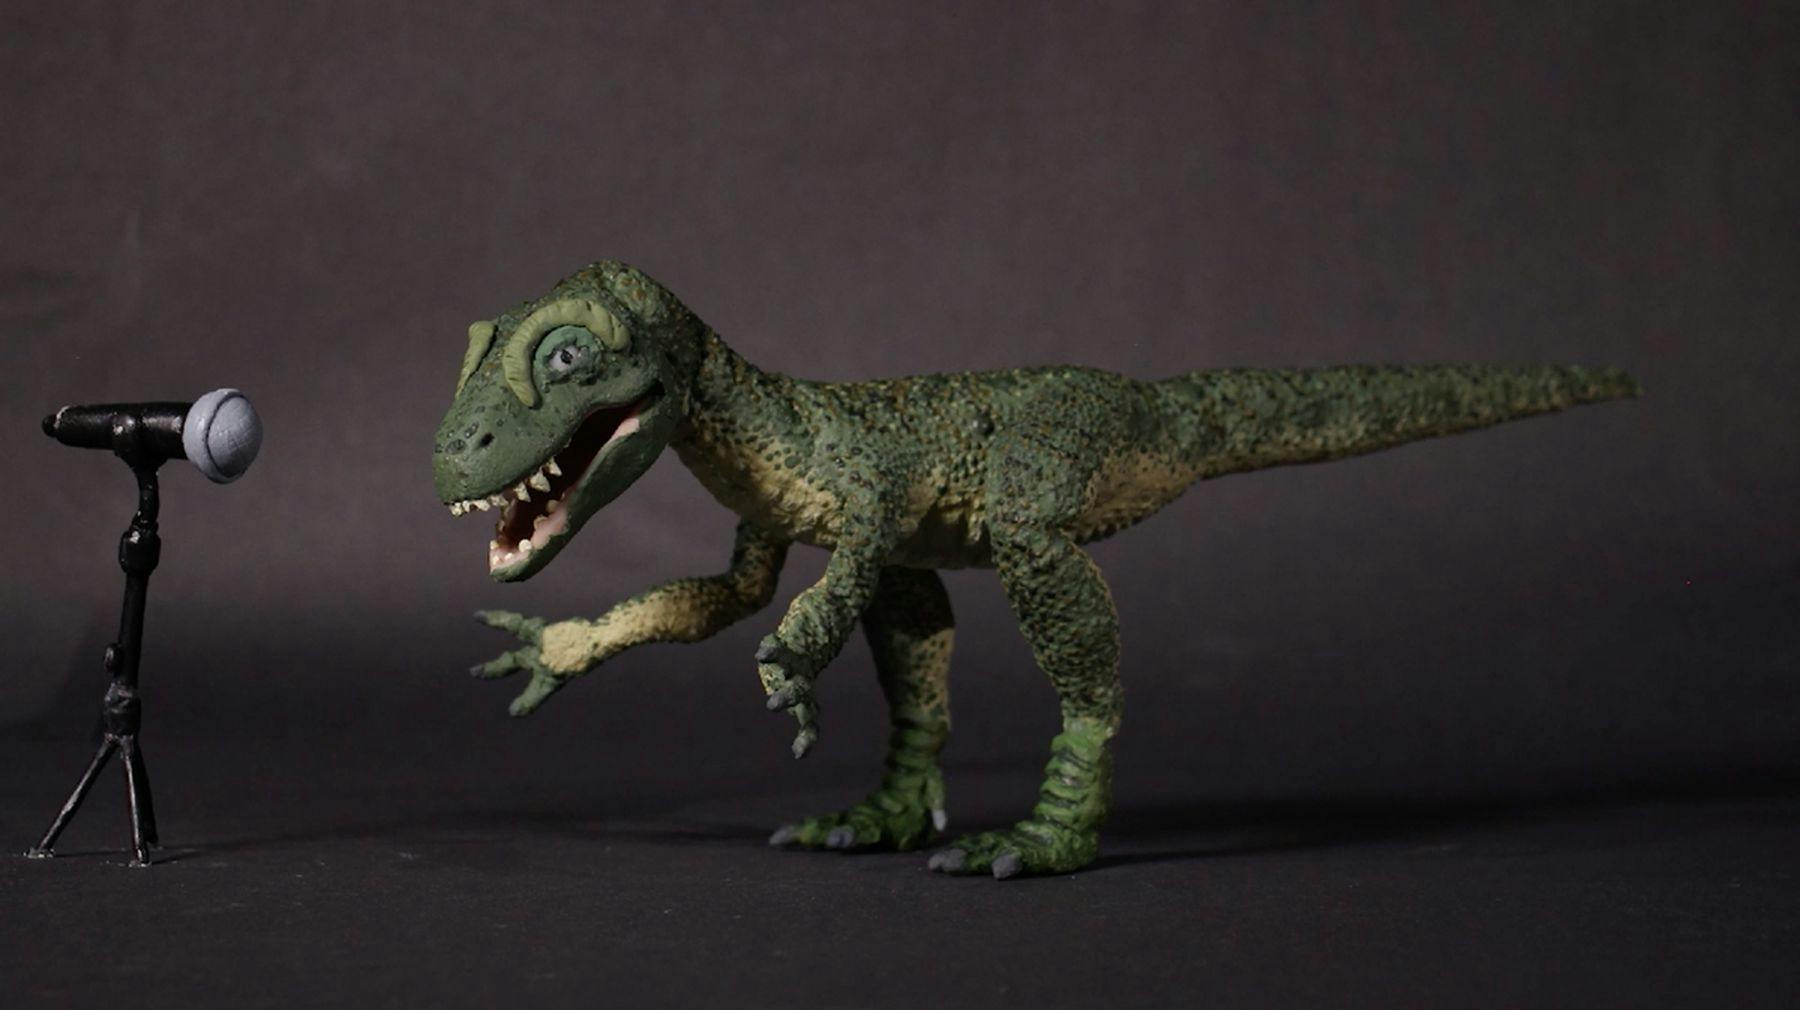 Model of a green dinosaur against a dark background standing in front of a microphone. Its mouth is open as if it is singing.